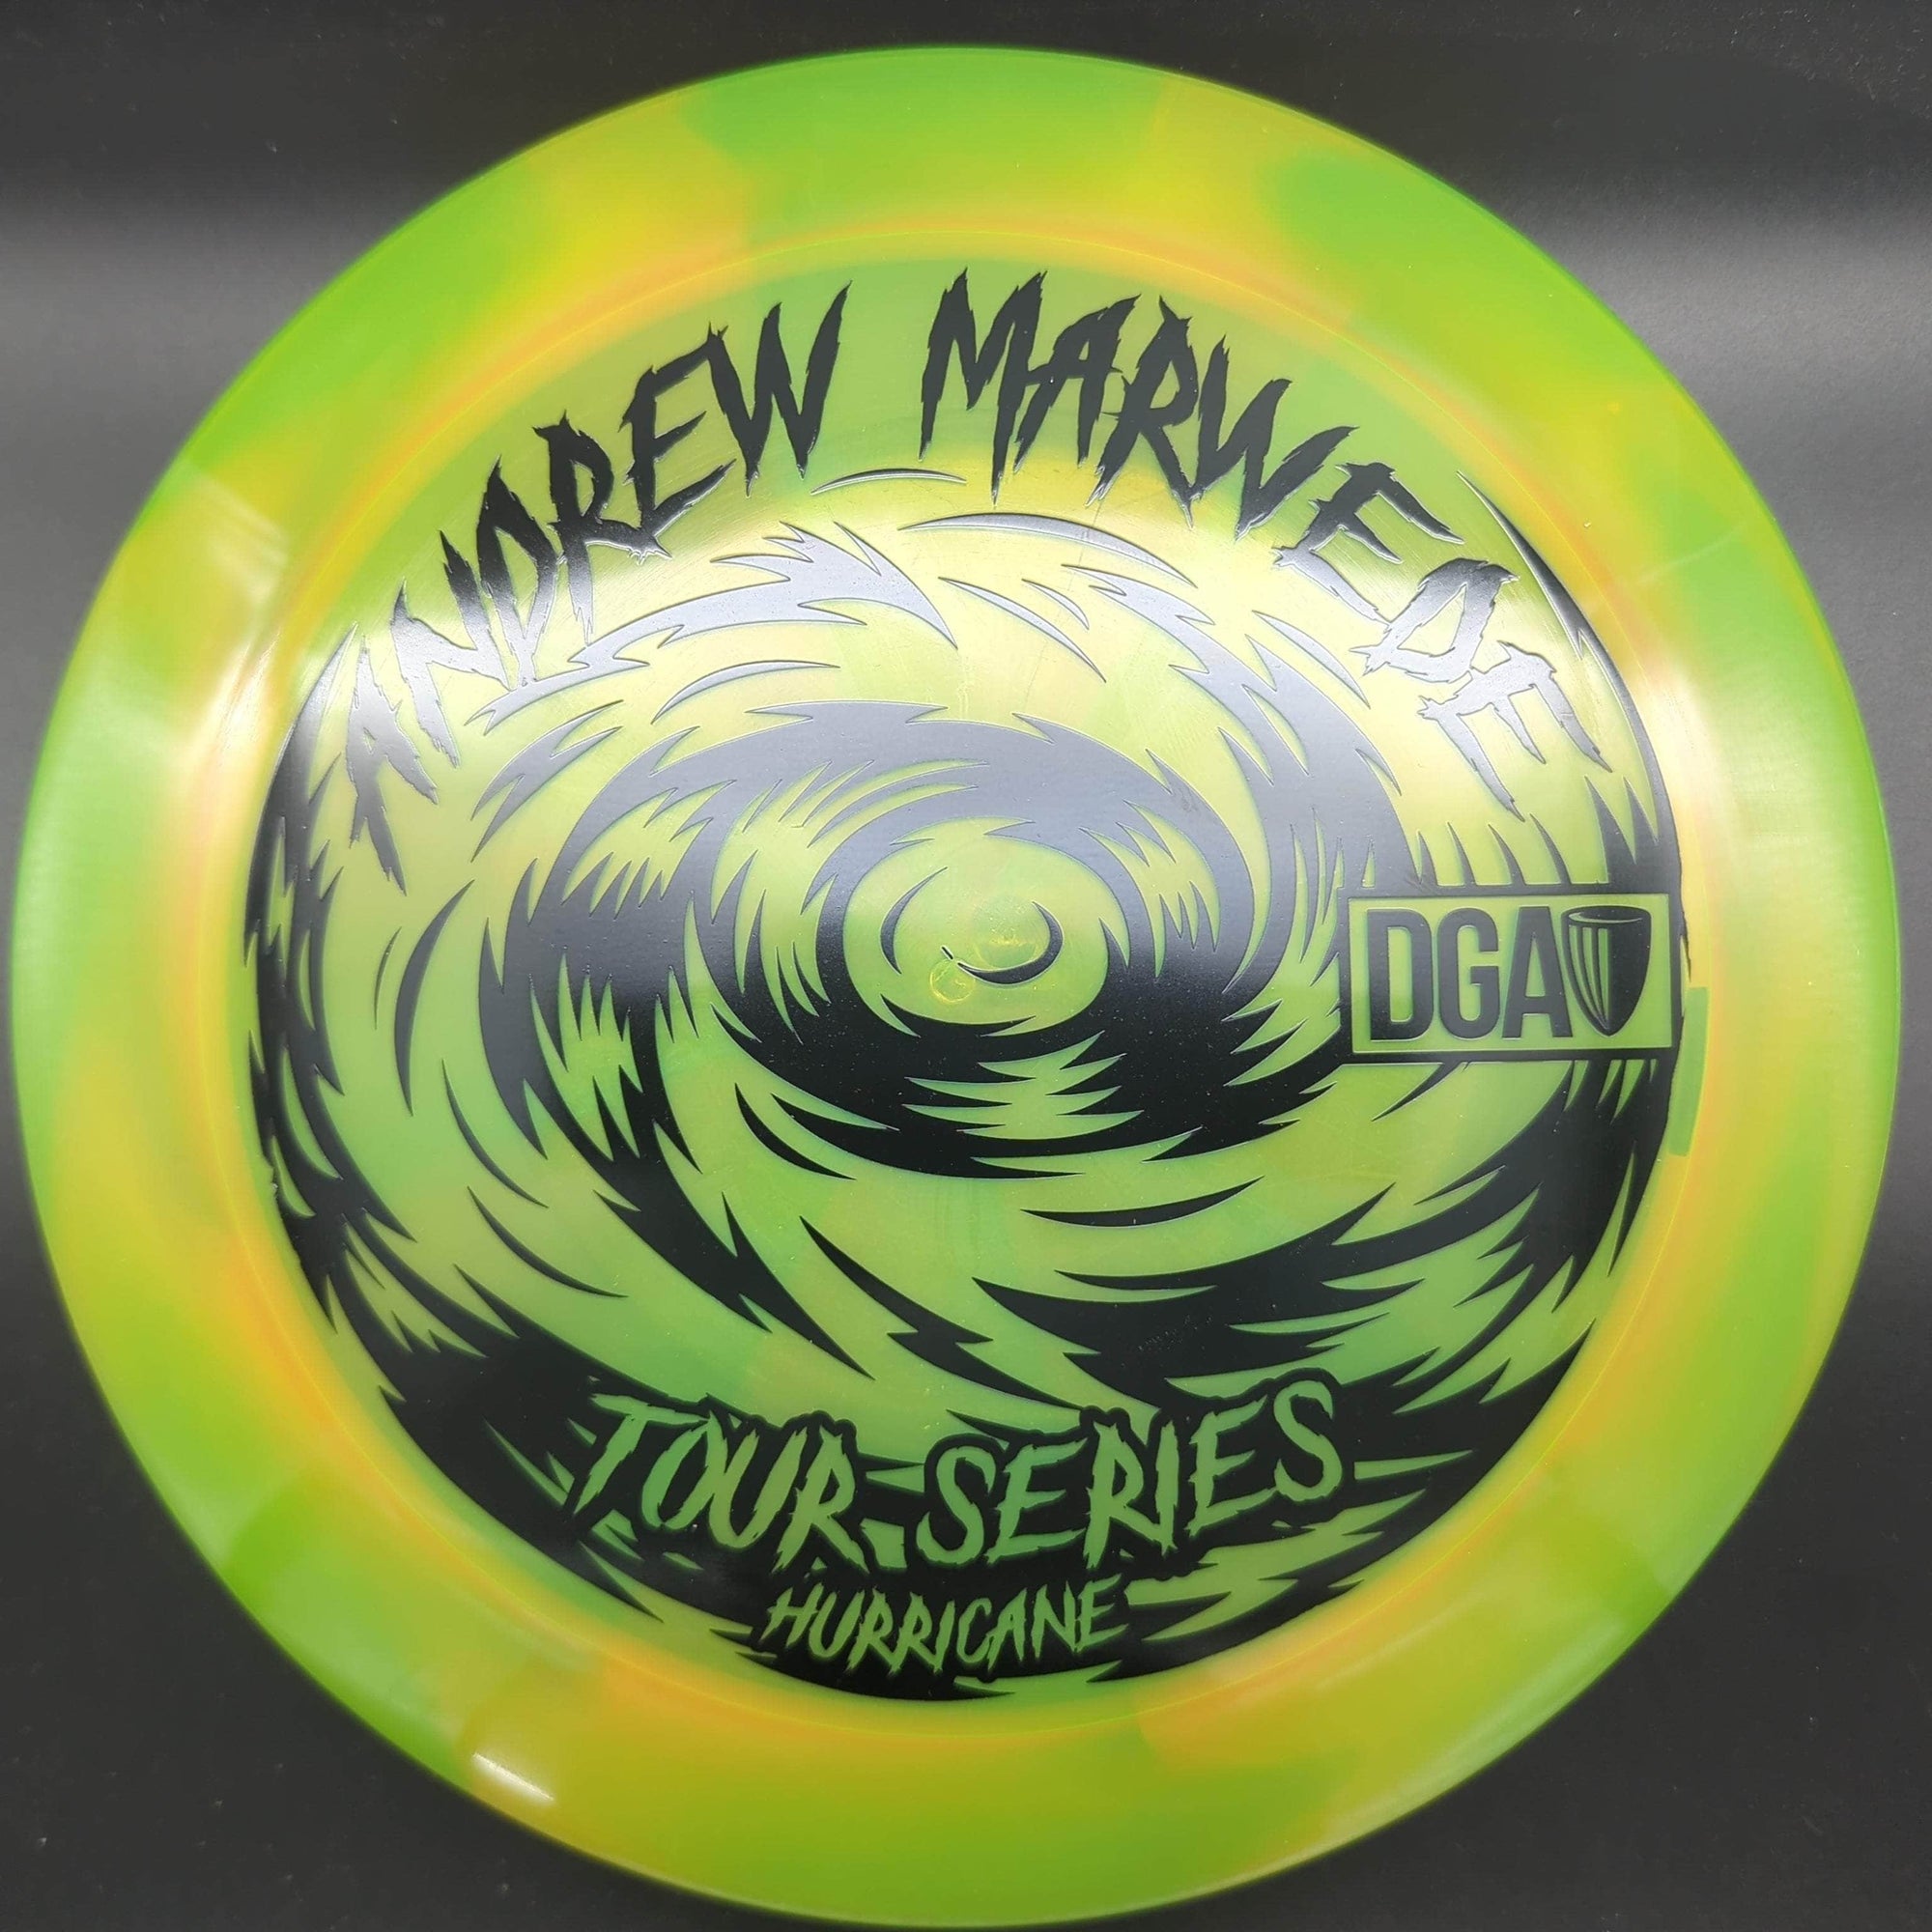 DGA Distance Driver Yellow/Green Black Stamp 174g Hurricane, Swirl, Andrew Marwede Tour Series 2023